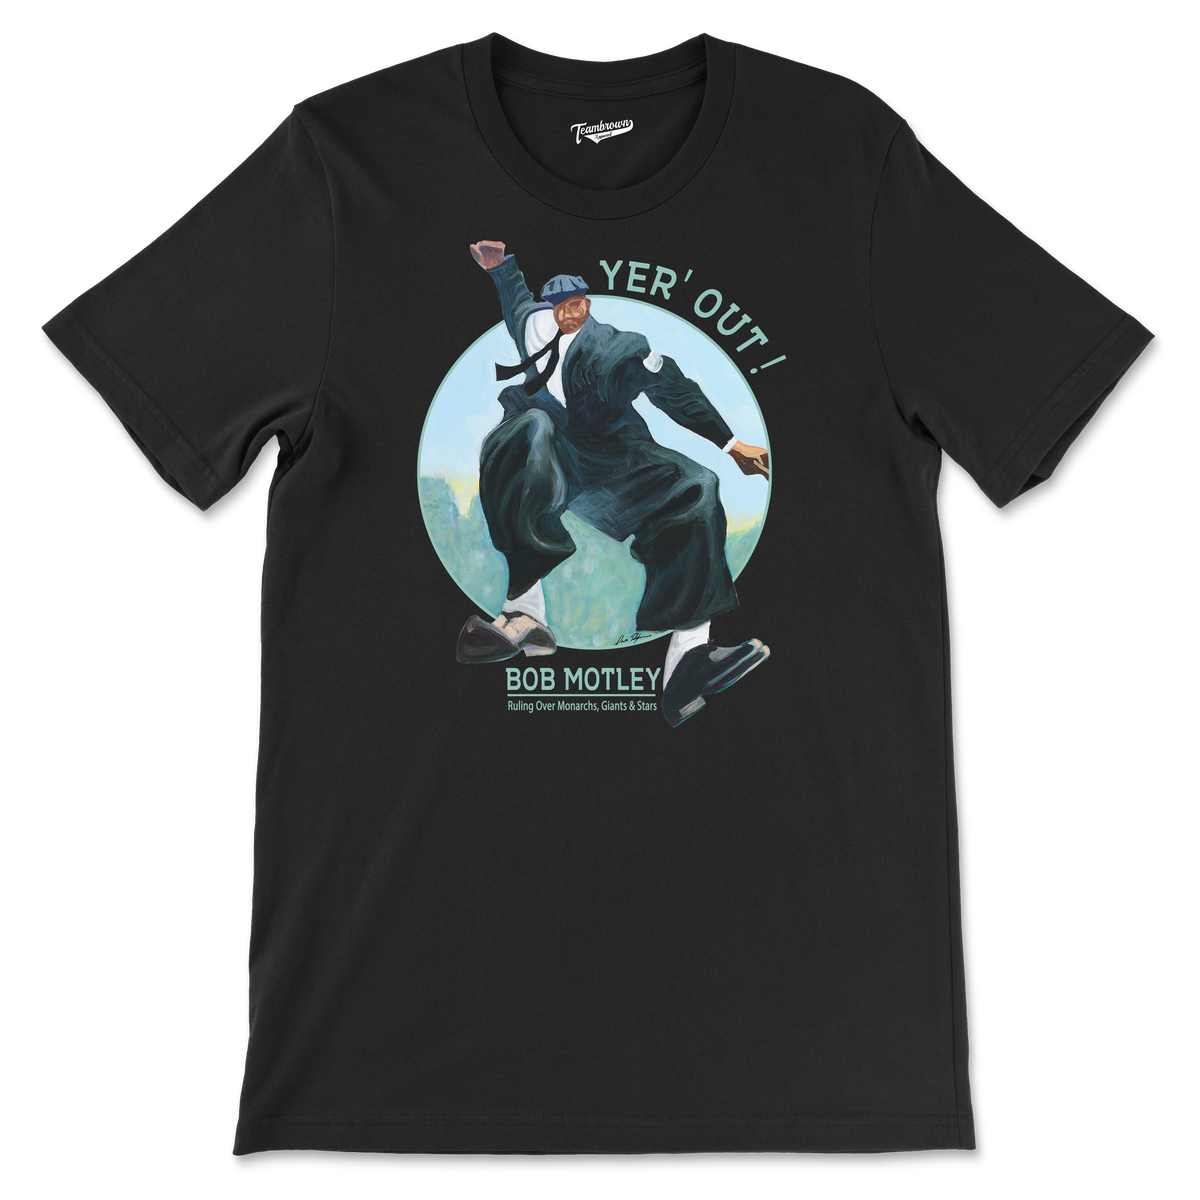 Bob Motley - Yer' Out! - Unisex T-Shirt | Officially Licensed - YABBA BIRI PRODUCTIONS, INC.